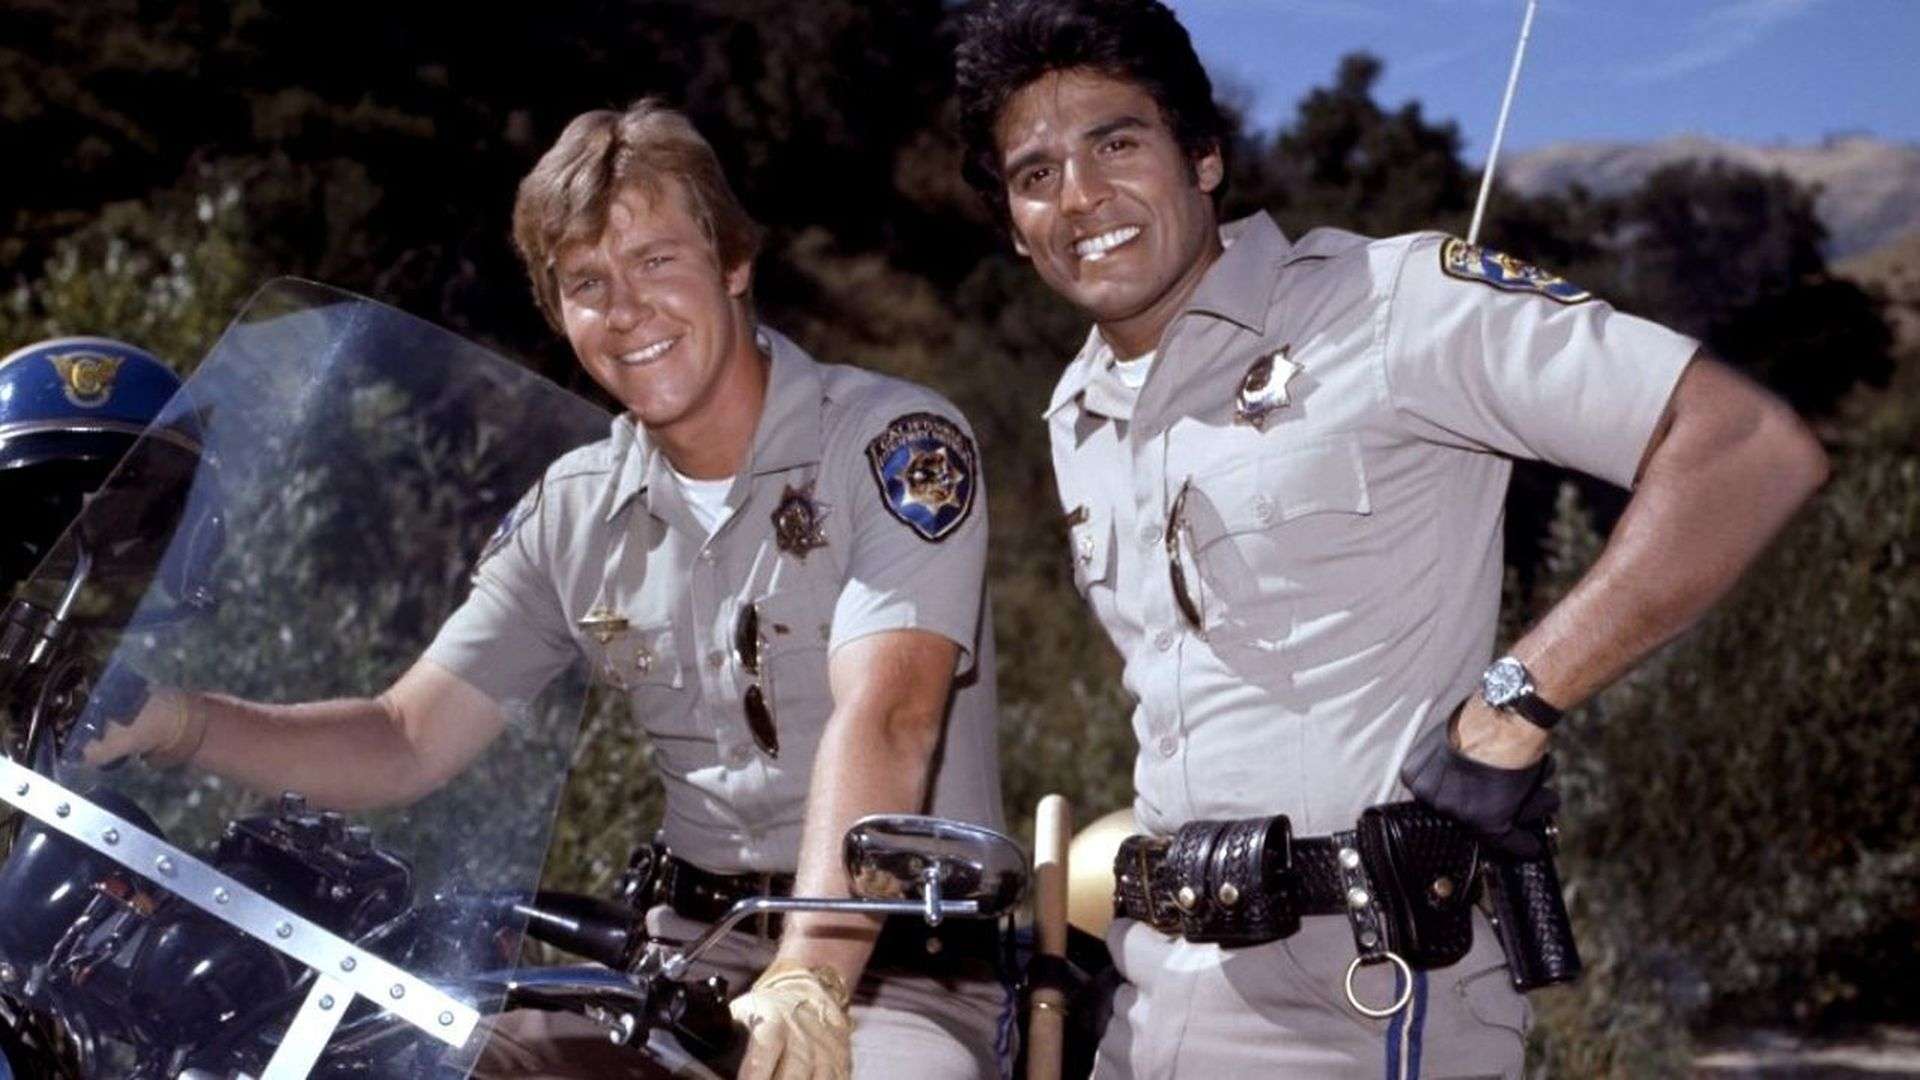 What do you know about the TV show CHiPs?